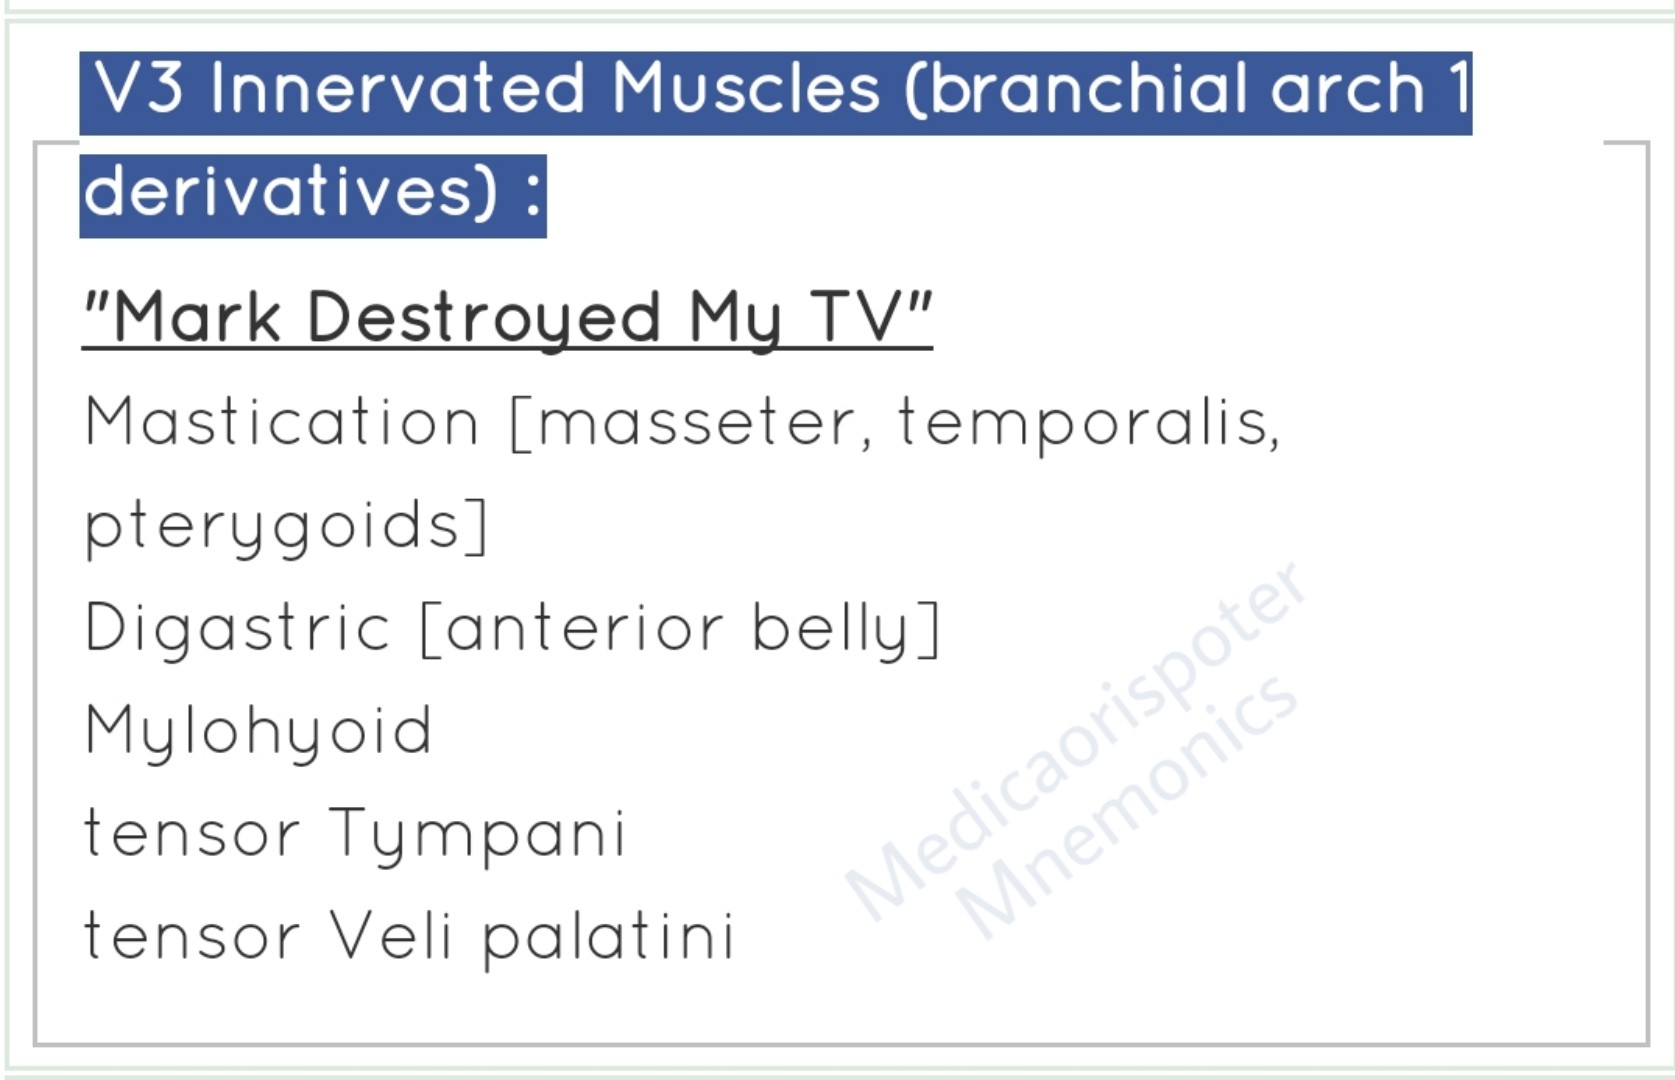 Muscles_Innervated_by_V3_Trigeminal_Nerve